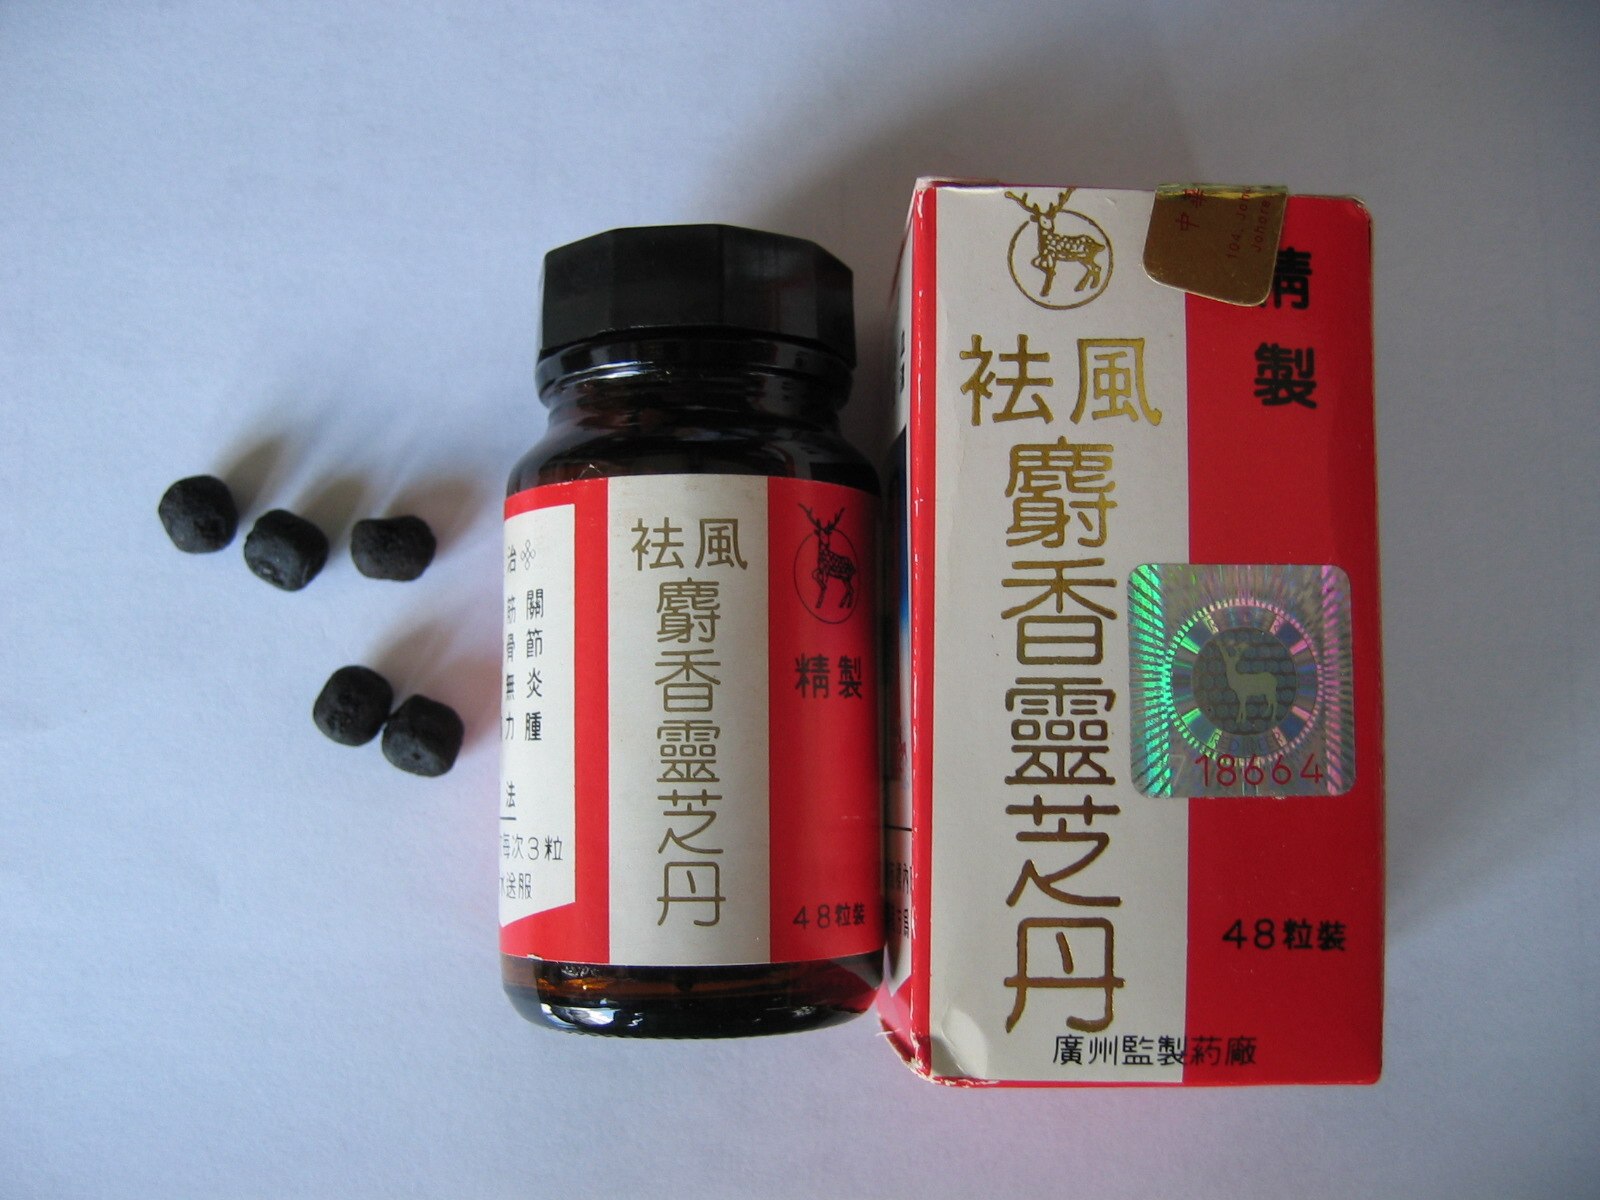 Chinese medicines containing Western drug ingredients and may cause side effects